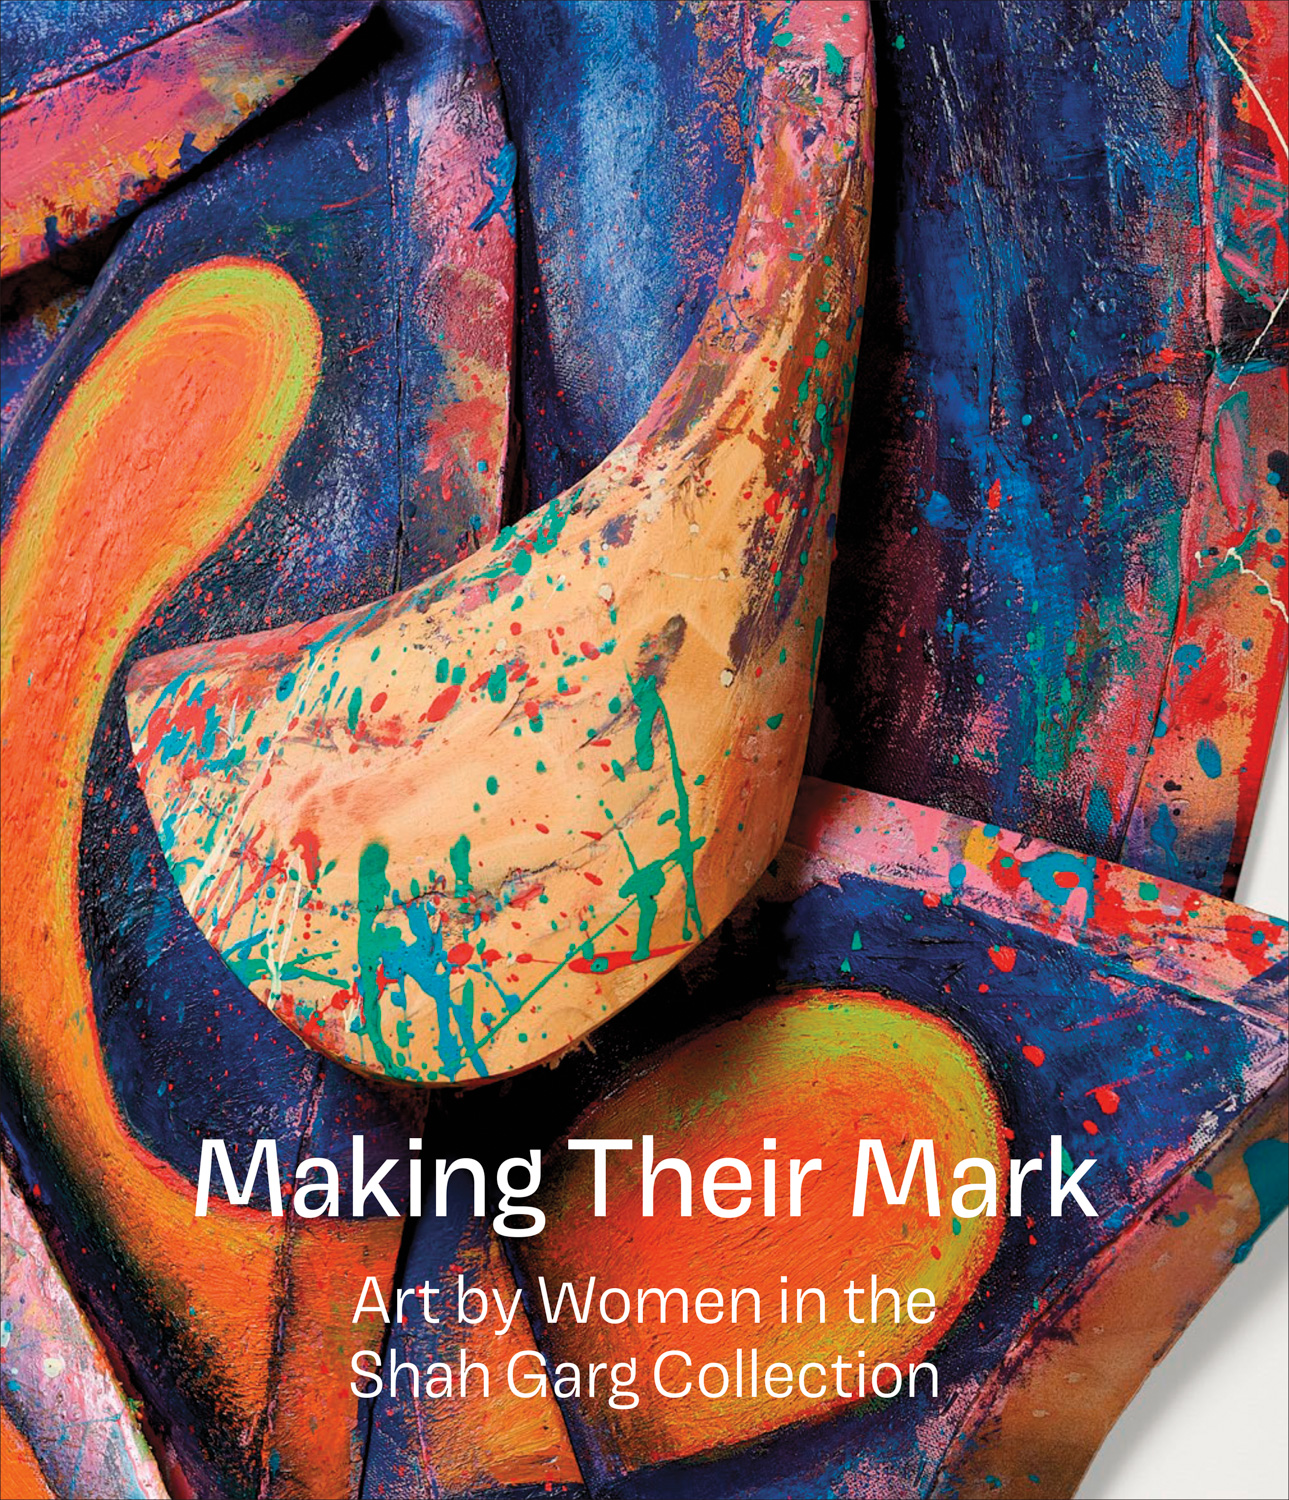 "Making Their Mark" book featuring vibrant, multicolored artwork of the Shah Garg collection